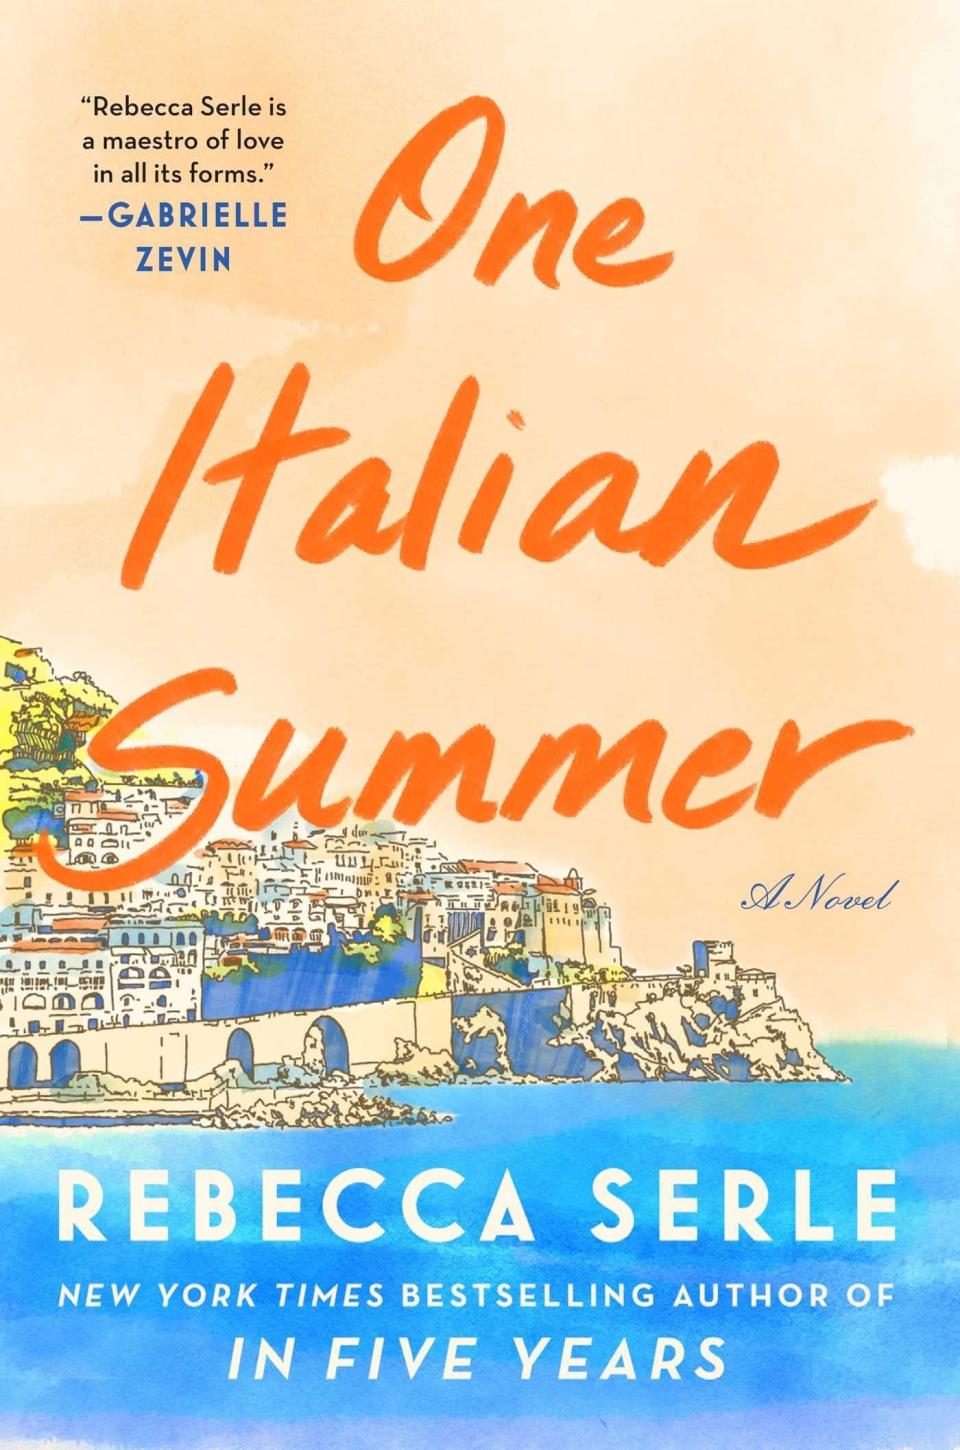 The cover of "One Italian Summer" by Rebecca Serle